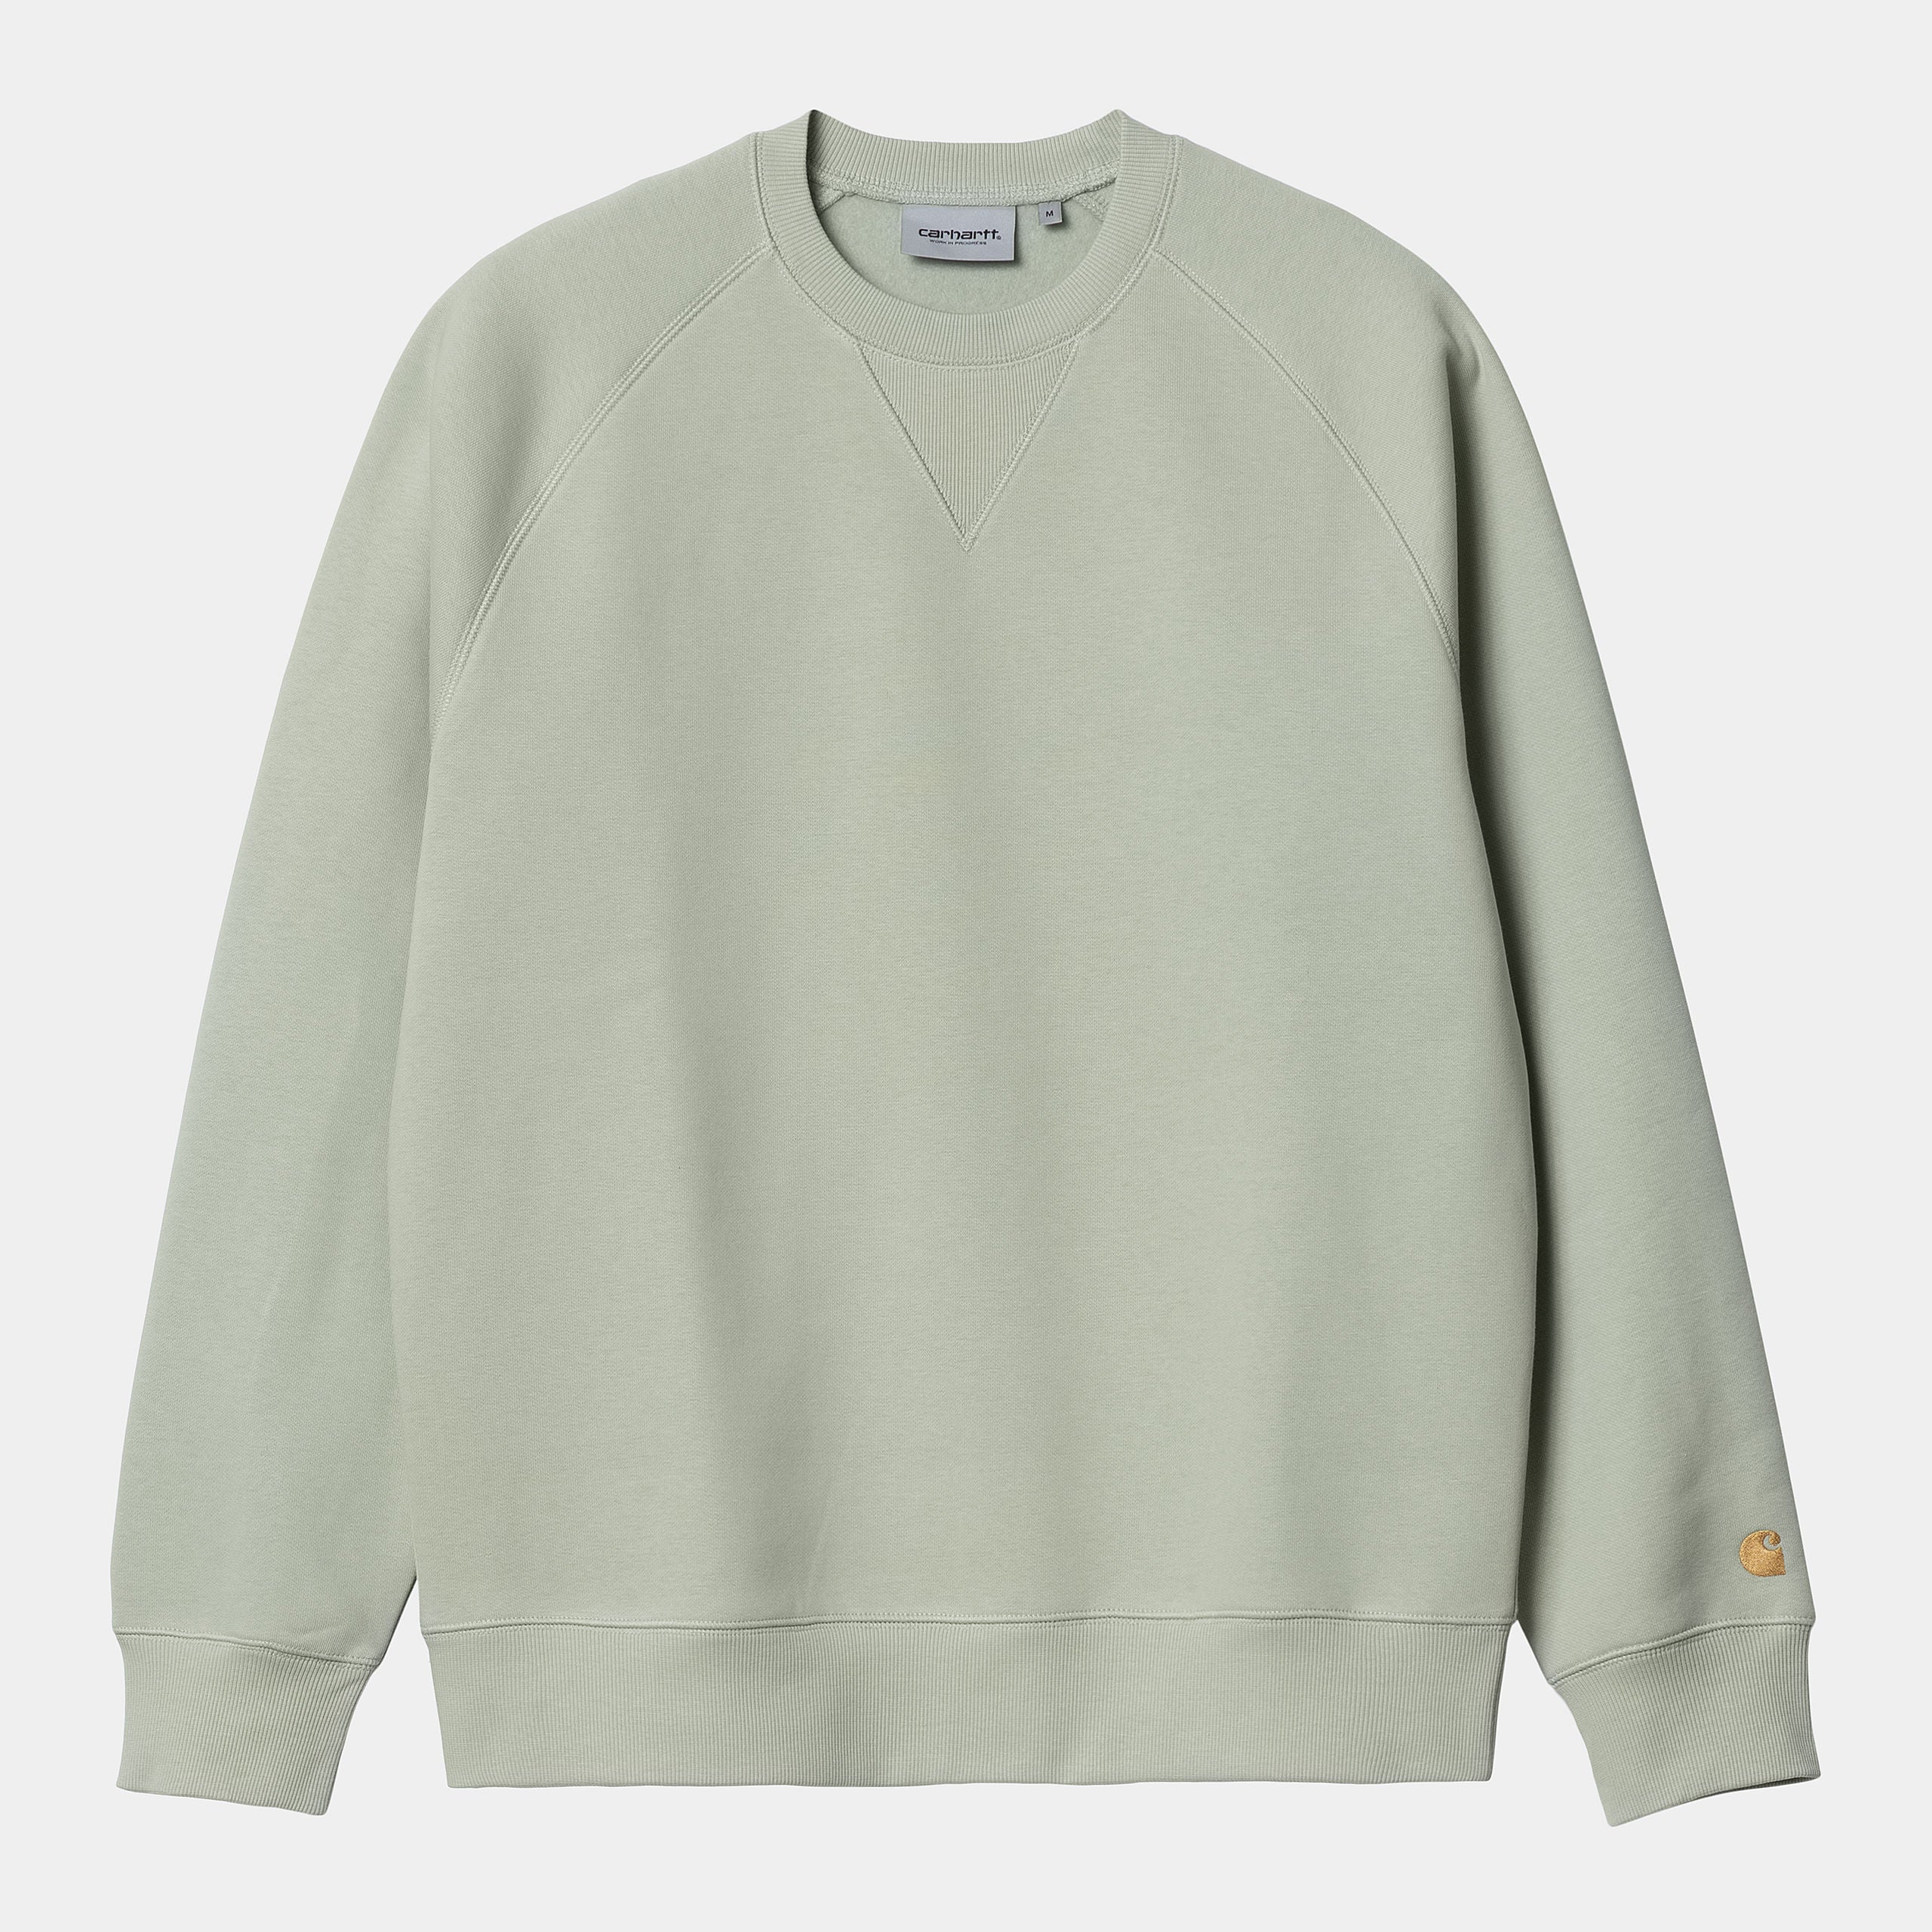 Carhartt WIP Mens Chase Sweat Top - Agave